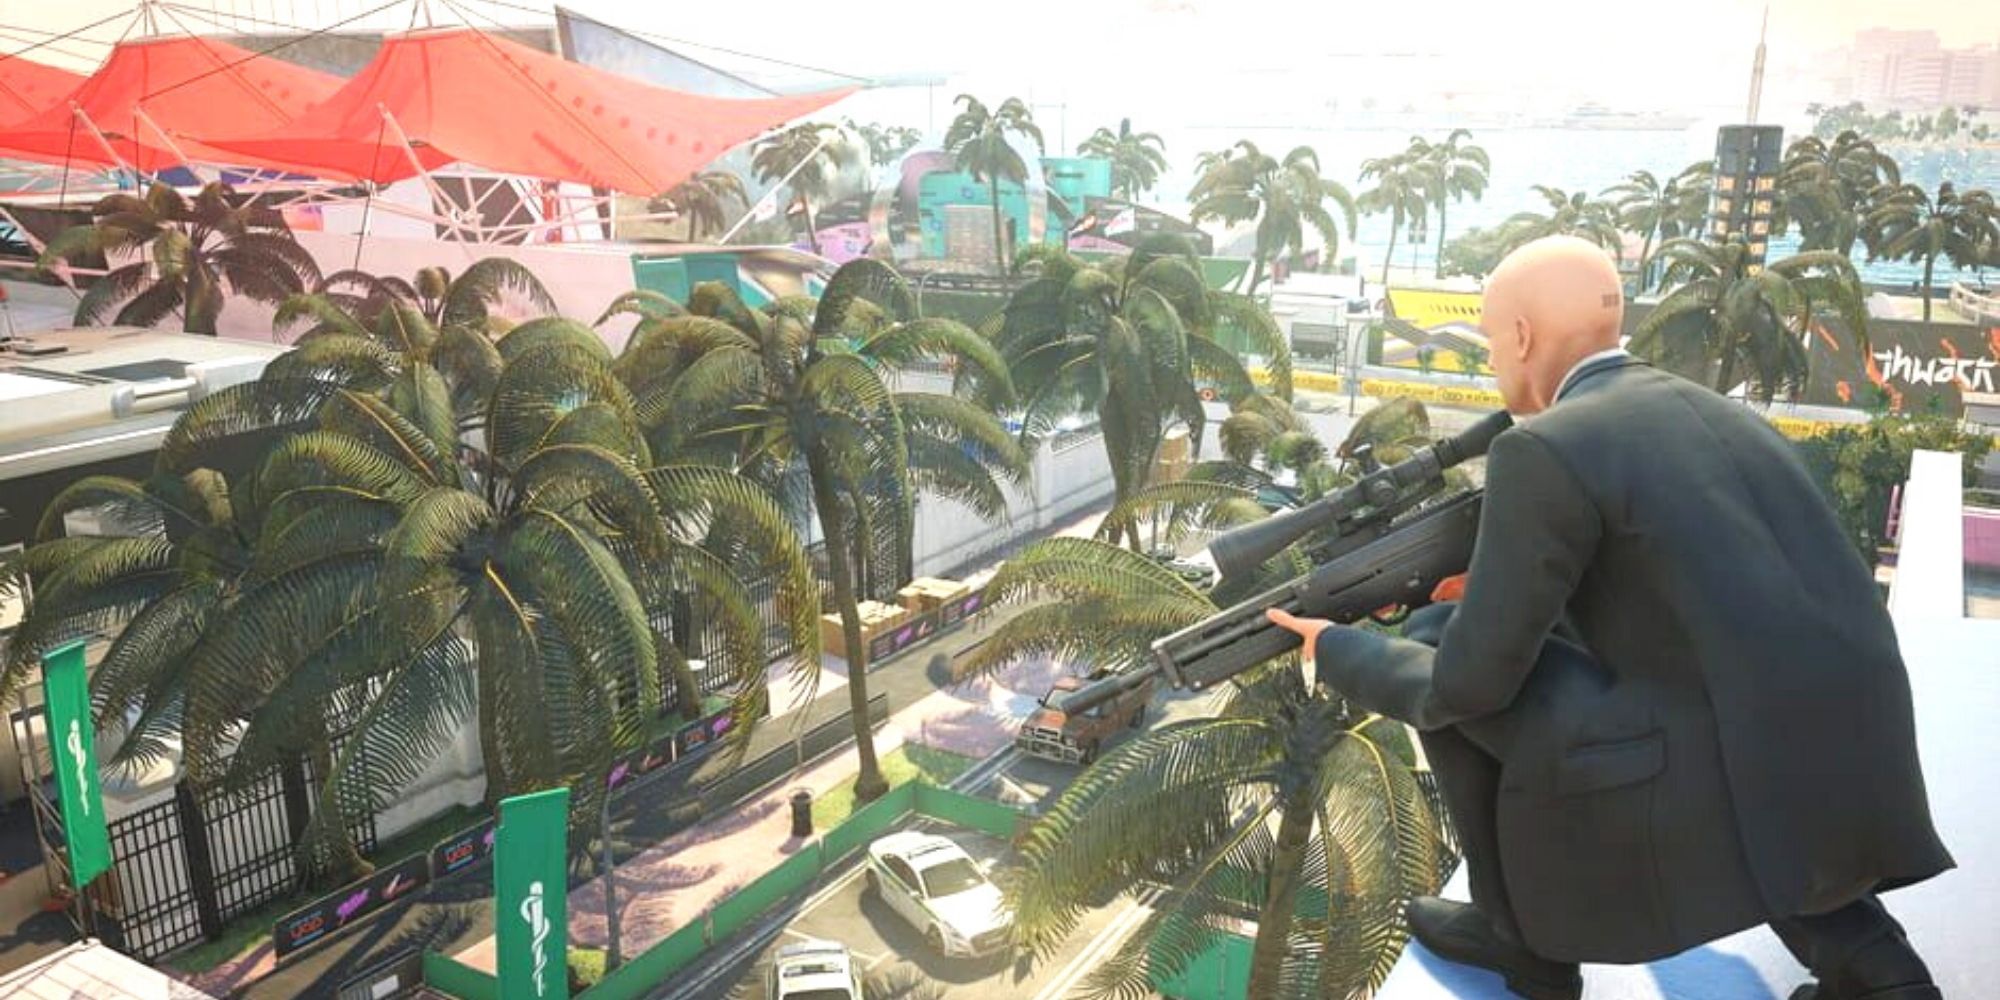 Hitman 2 Agent 47 Scouting Miami With Sniper Rifle 1